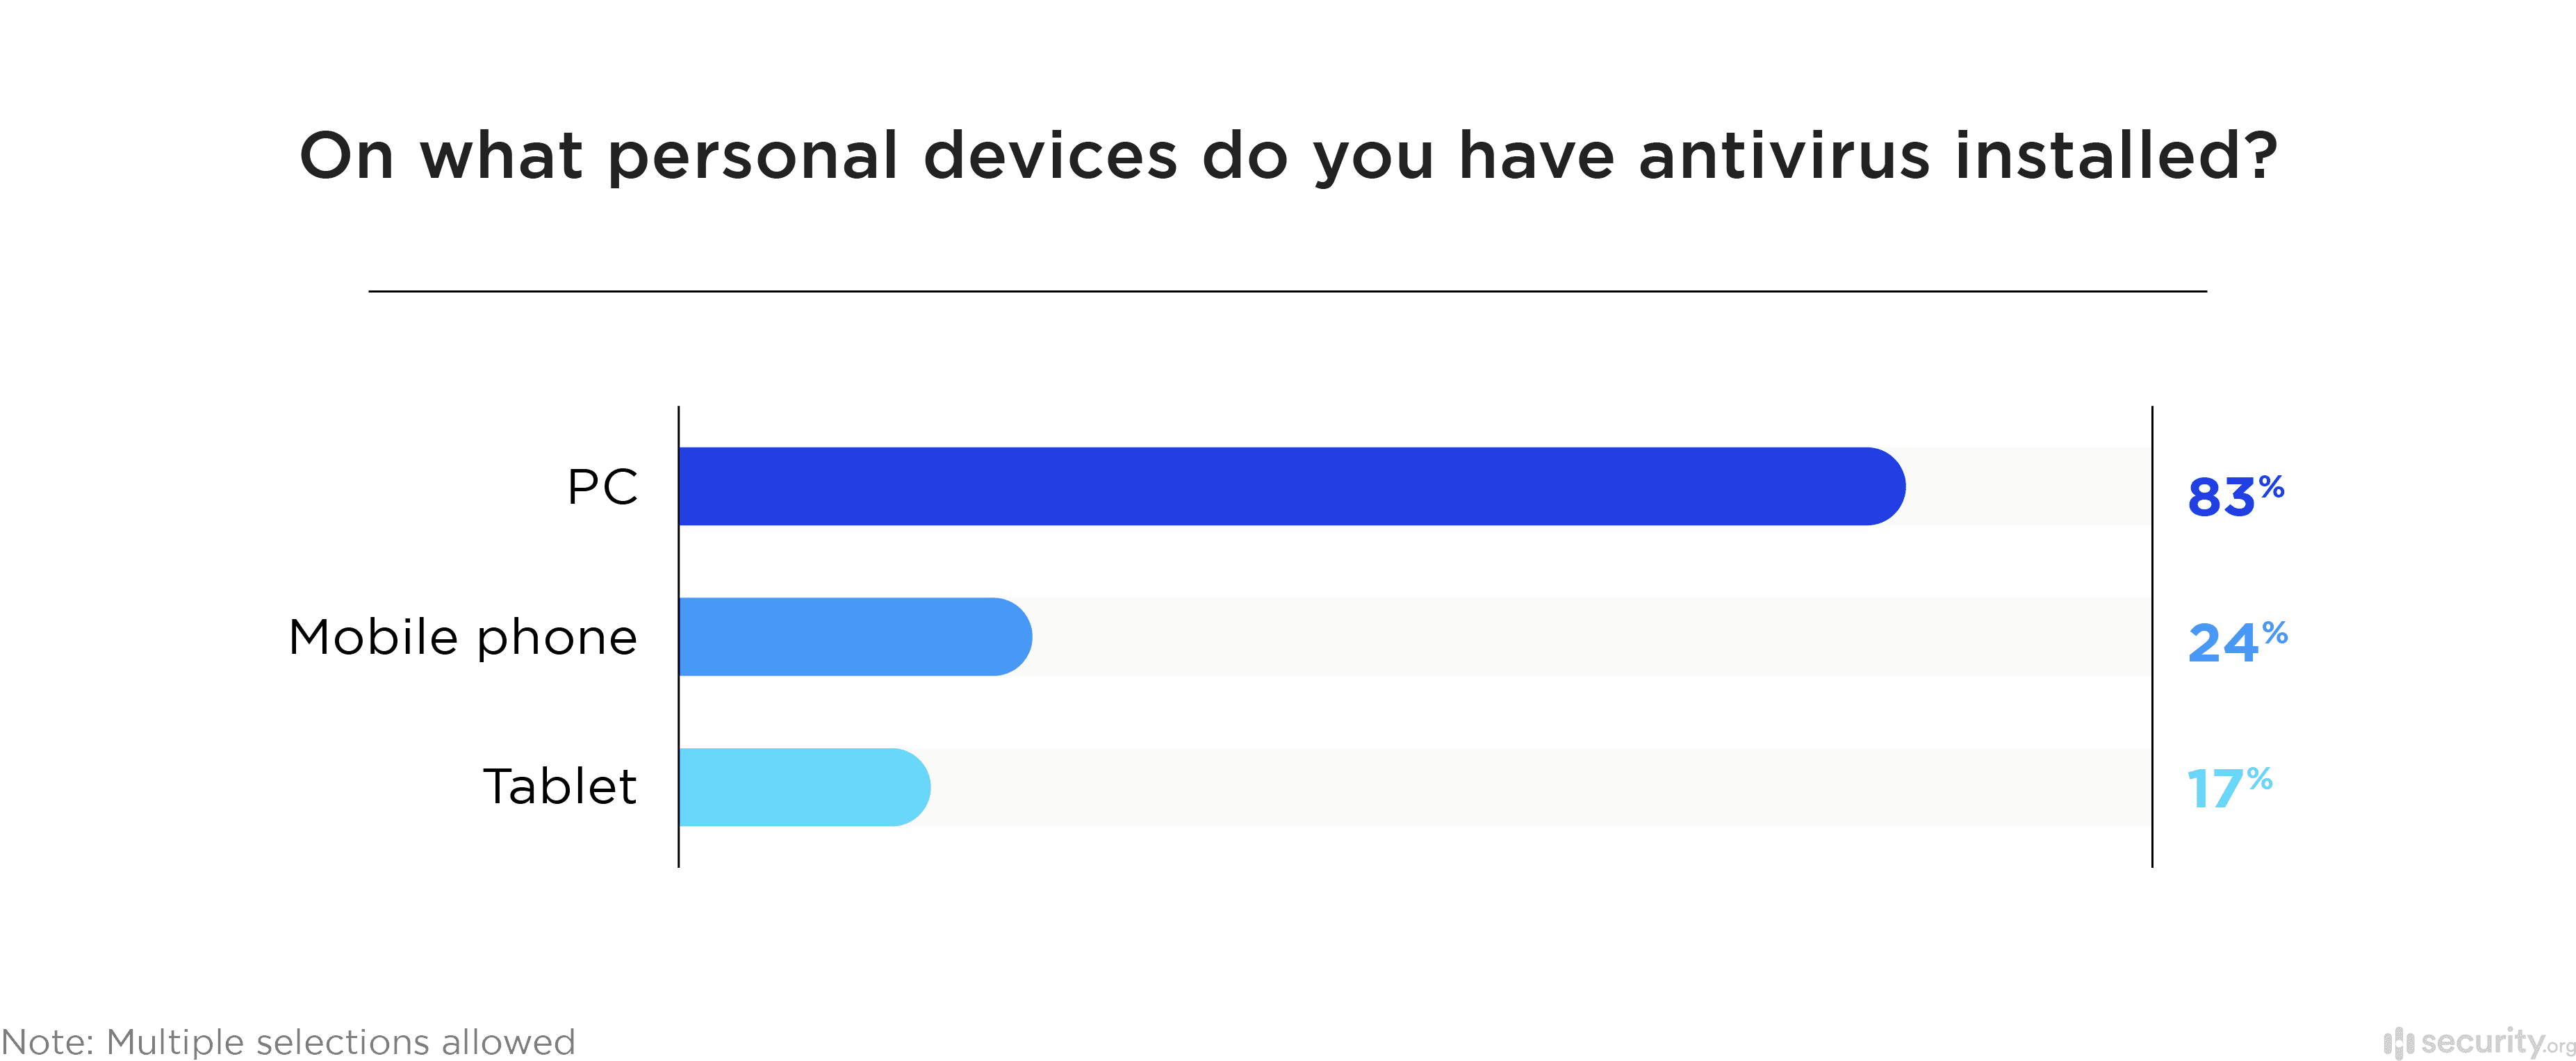 On what personal devices do you have antivirus installed